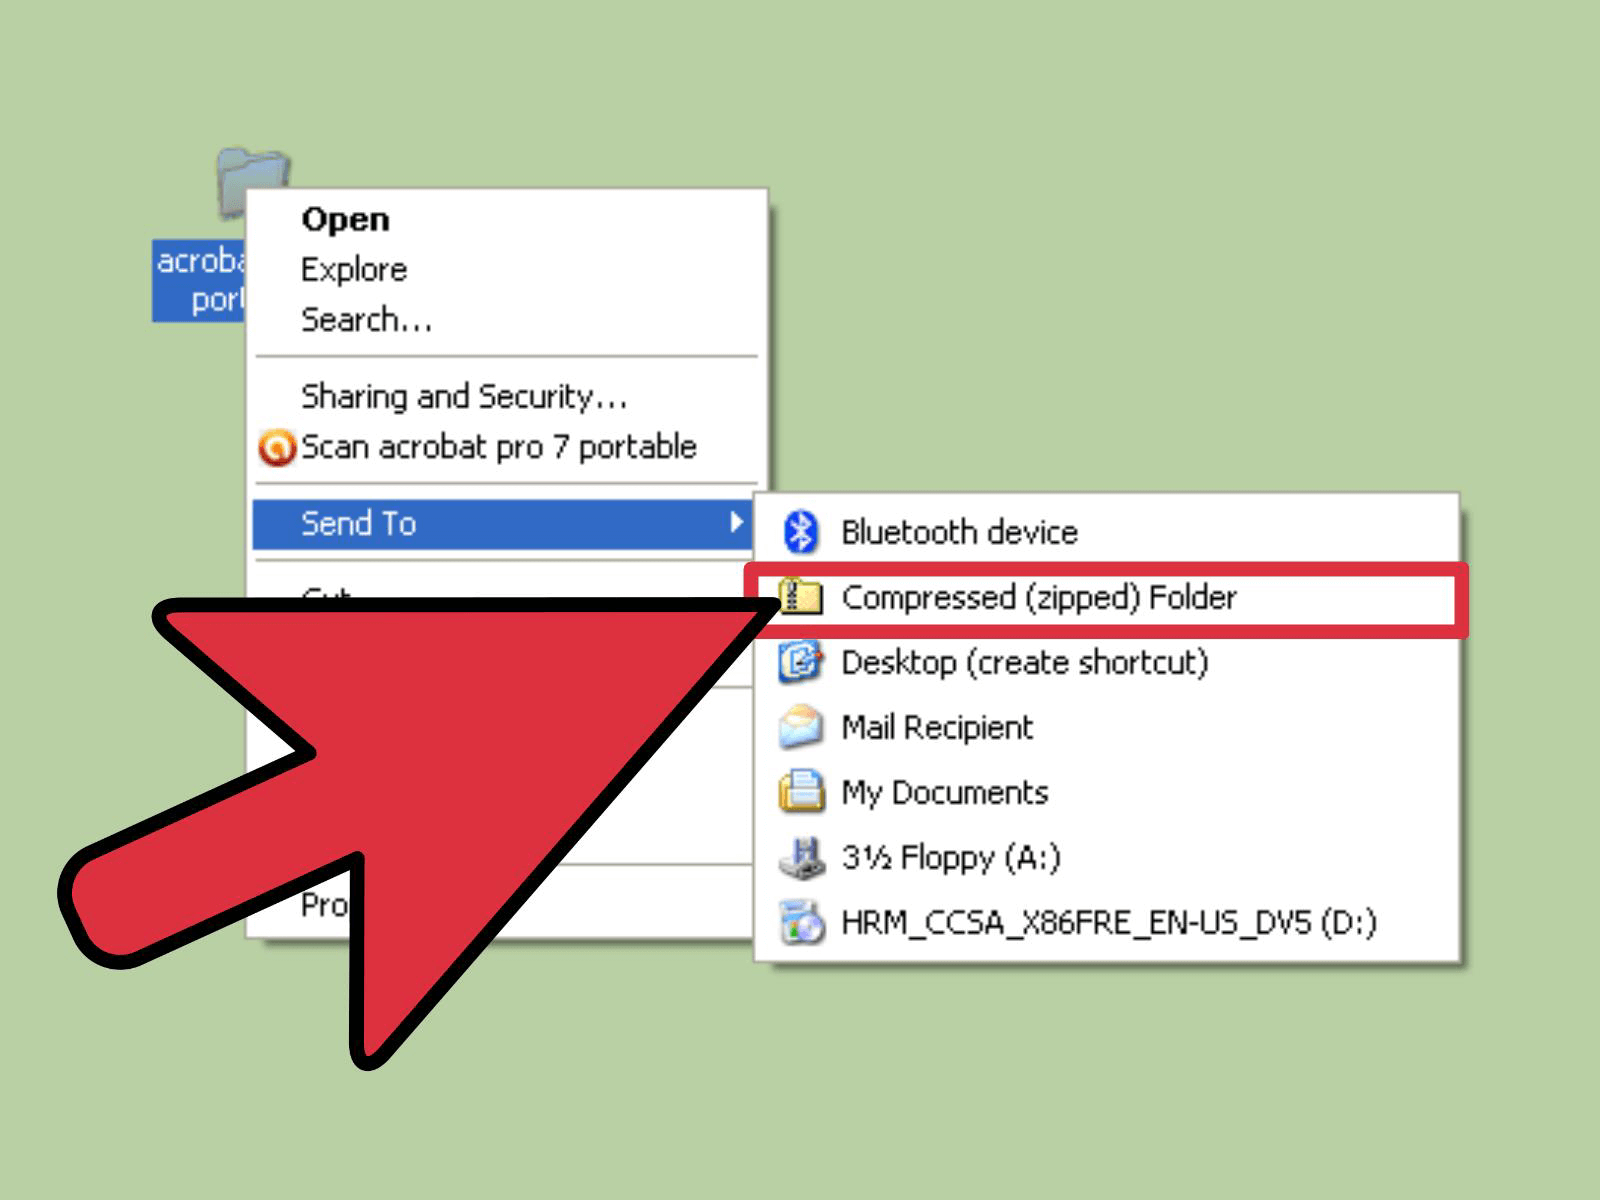 4 Solutions to “The File Is Too Large for the Destination USB”